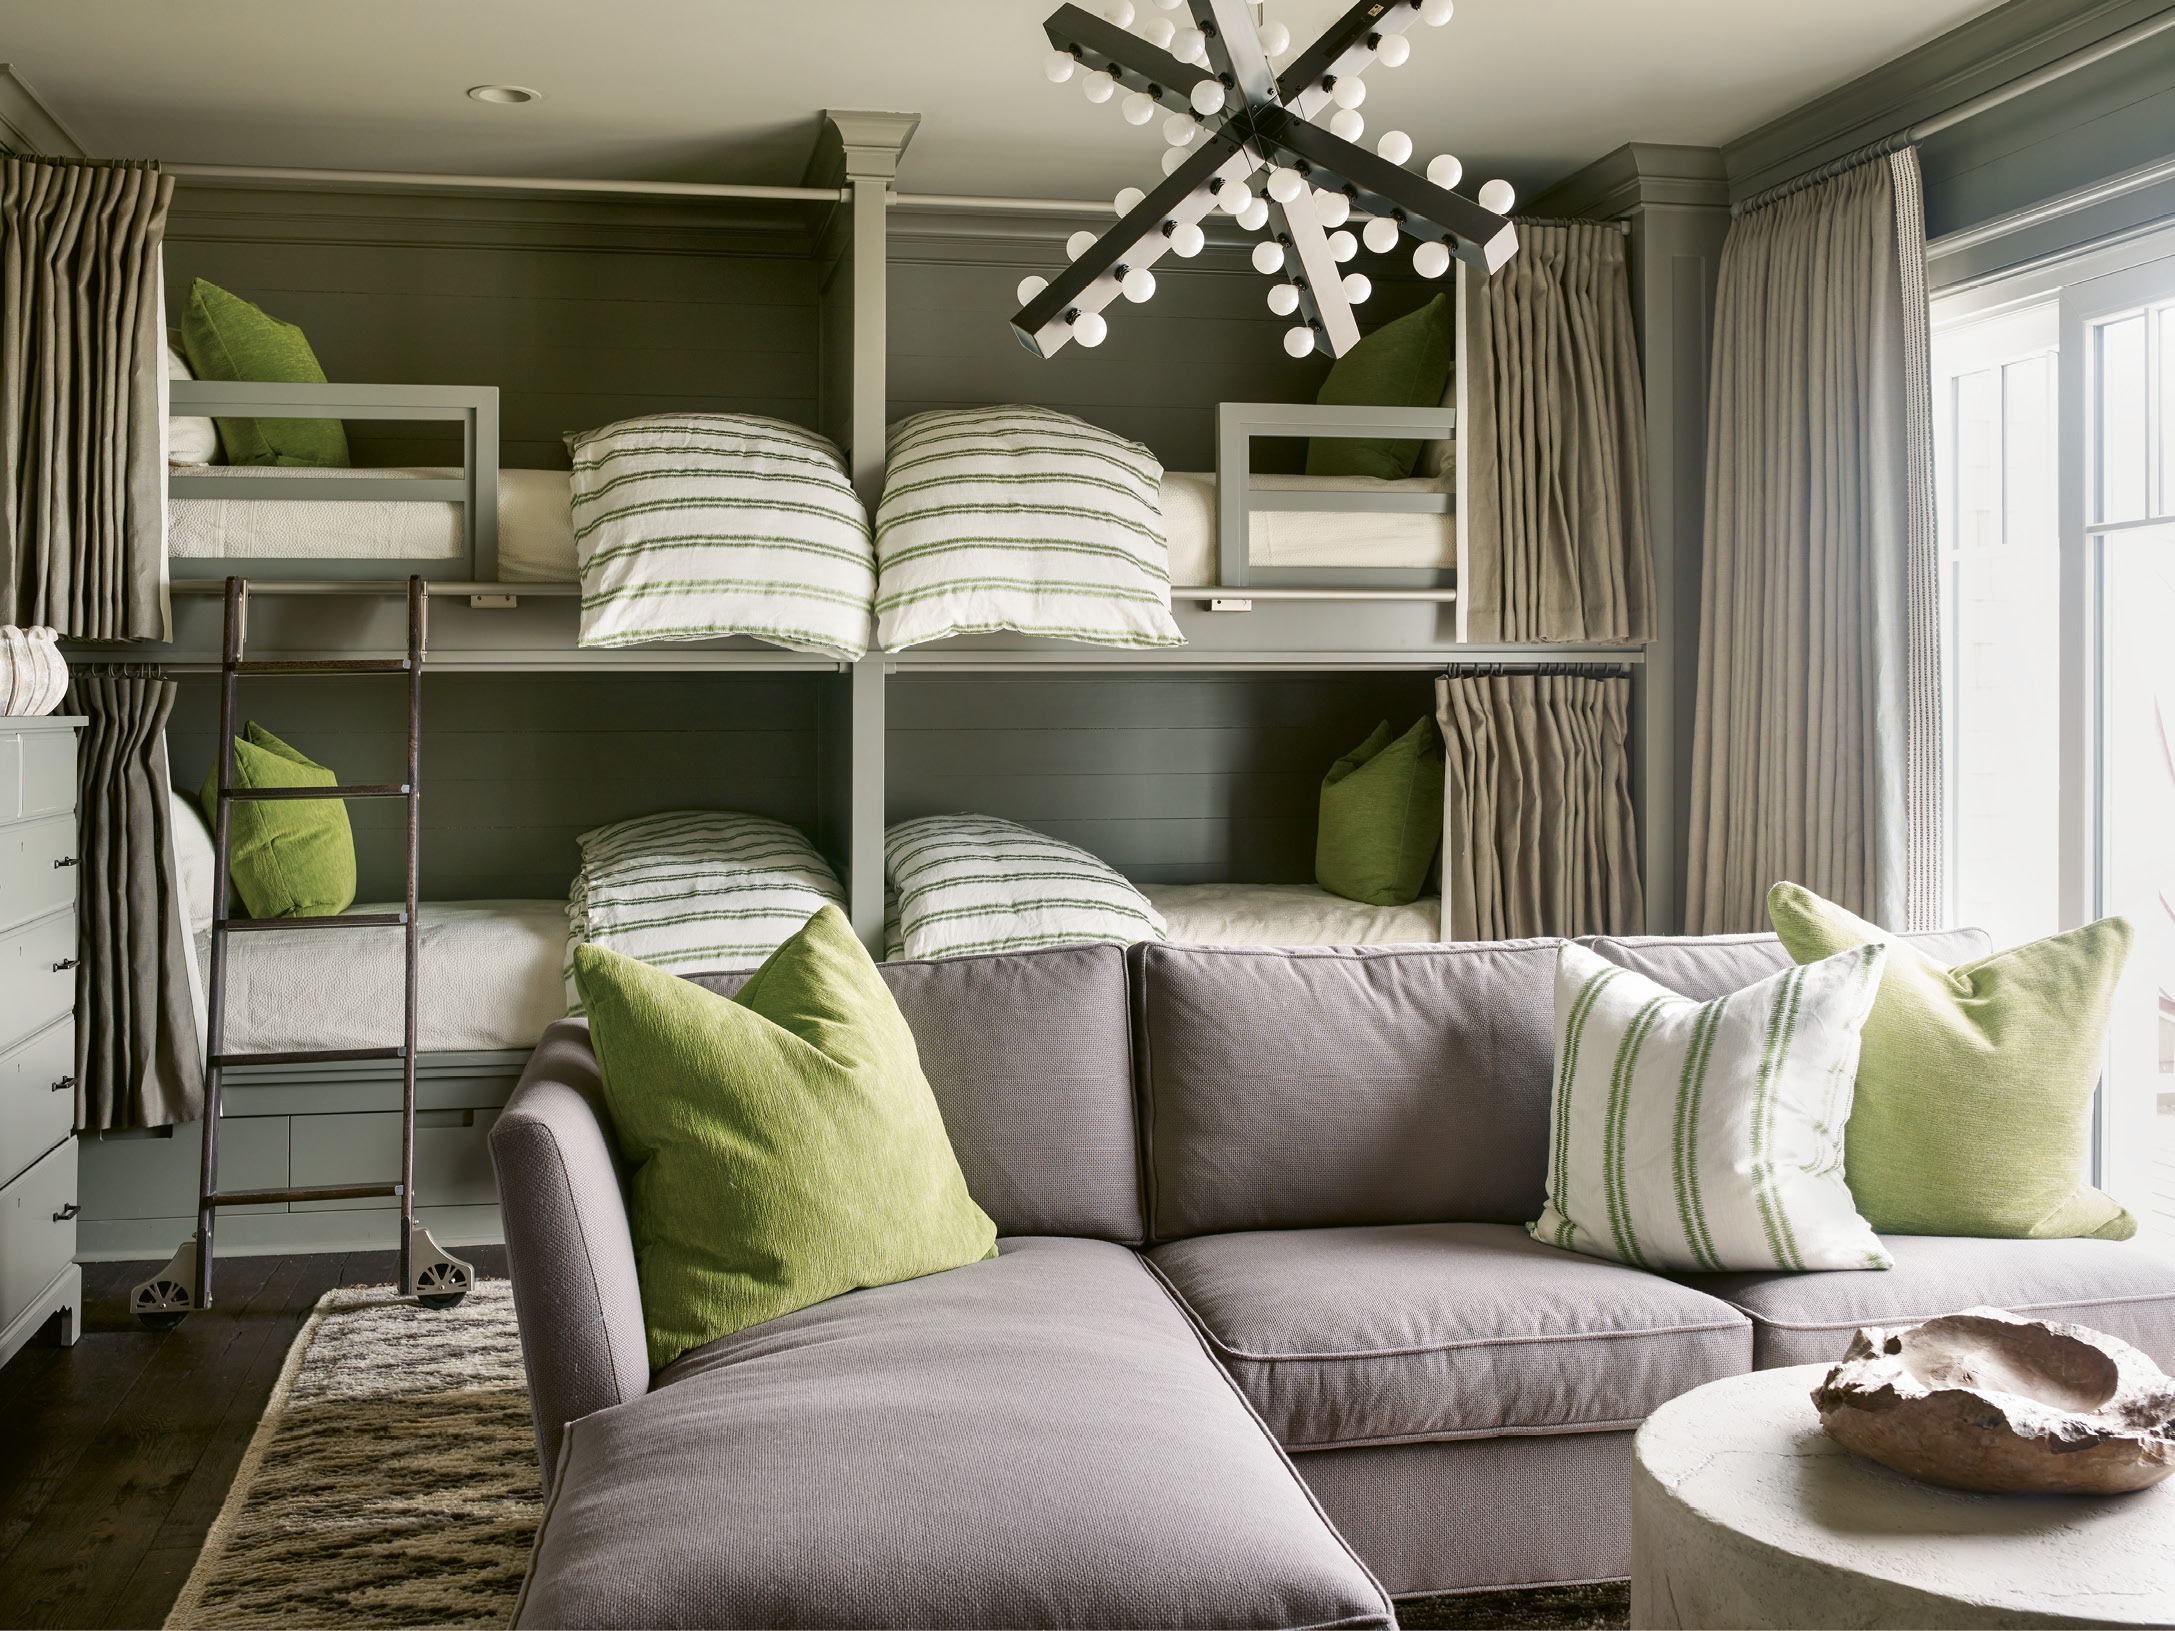 The bunk room’s cool comforts include the slate grey walls, shag Moroccan carpet, and pops of lime green.